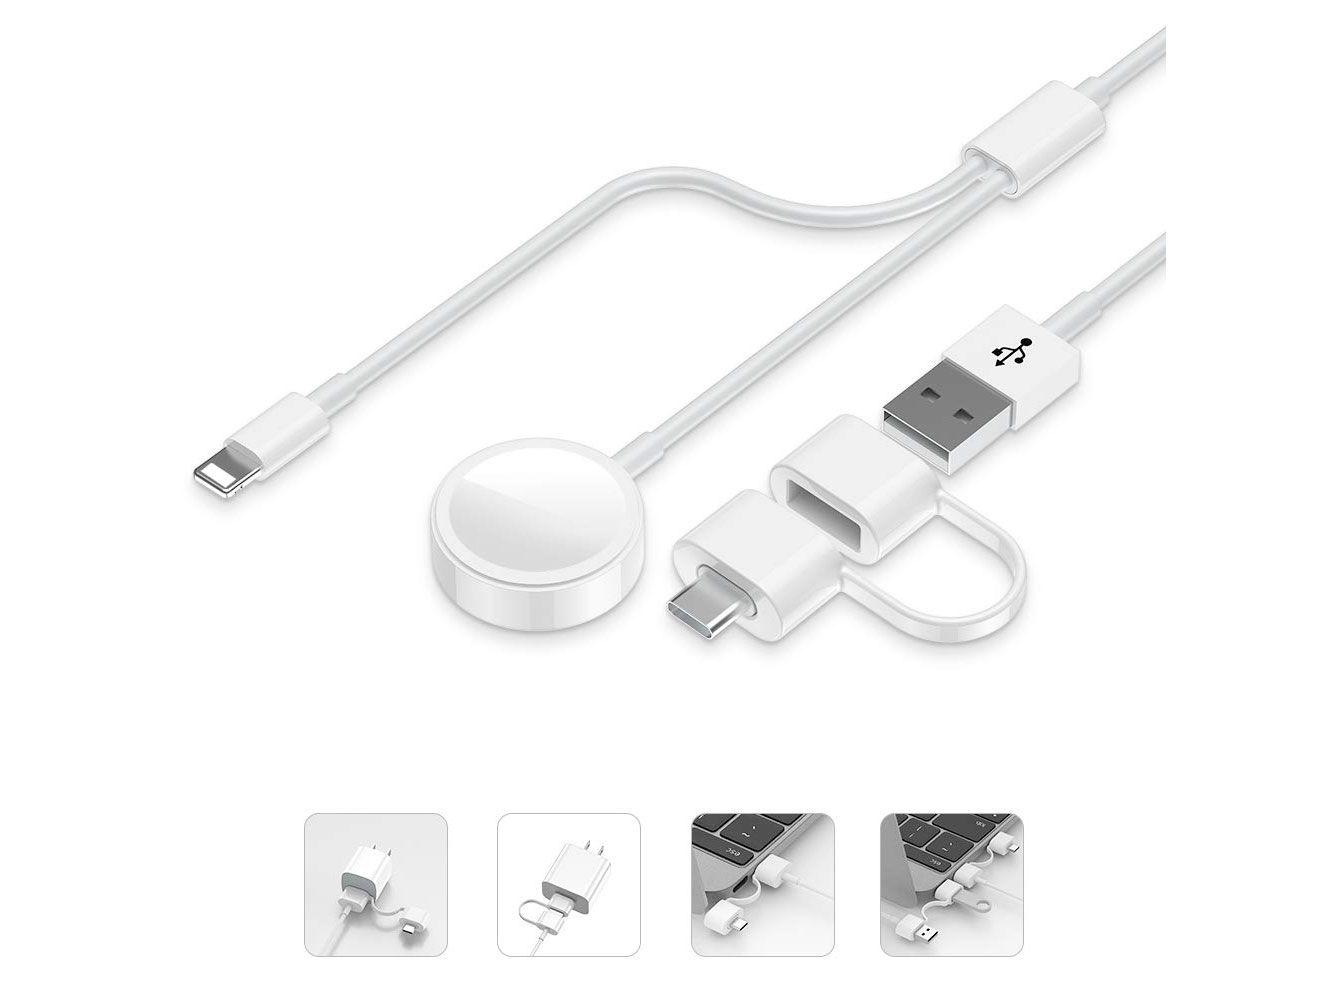 Amazon：USB A/TYPE C 2-in-1 Charing Cable and Wireless Charger只卖$10.10